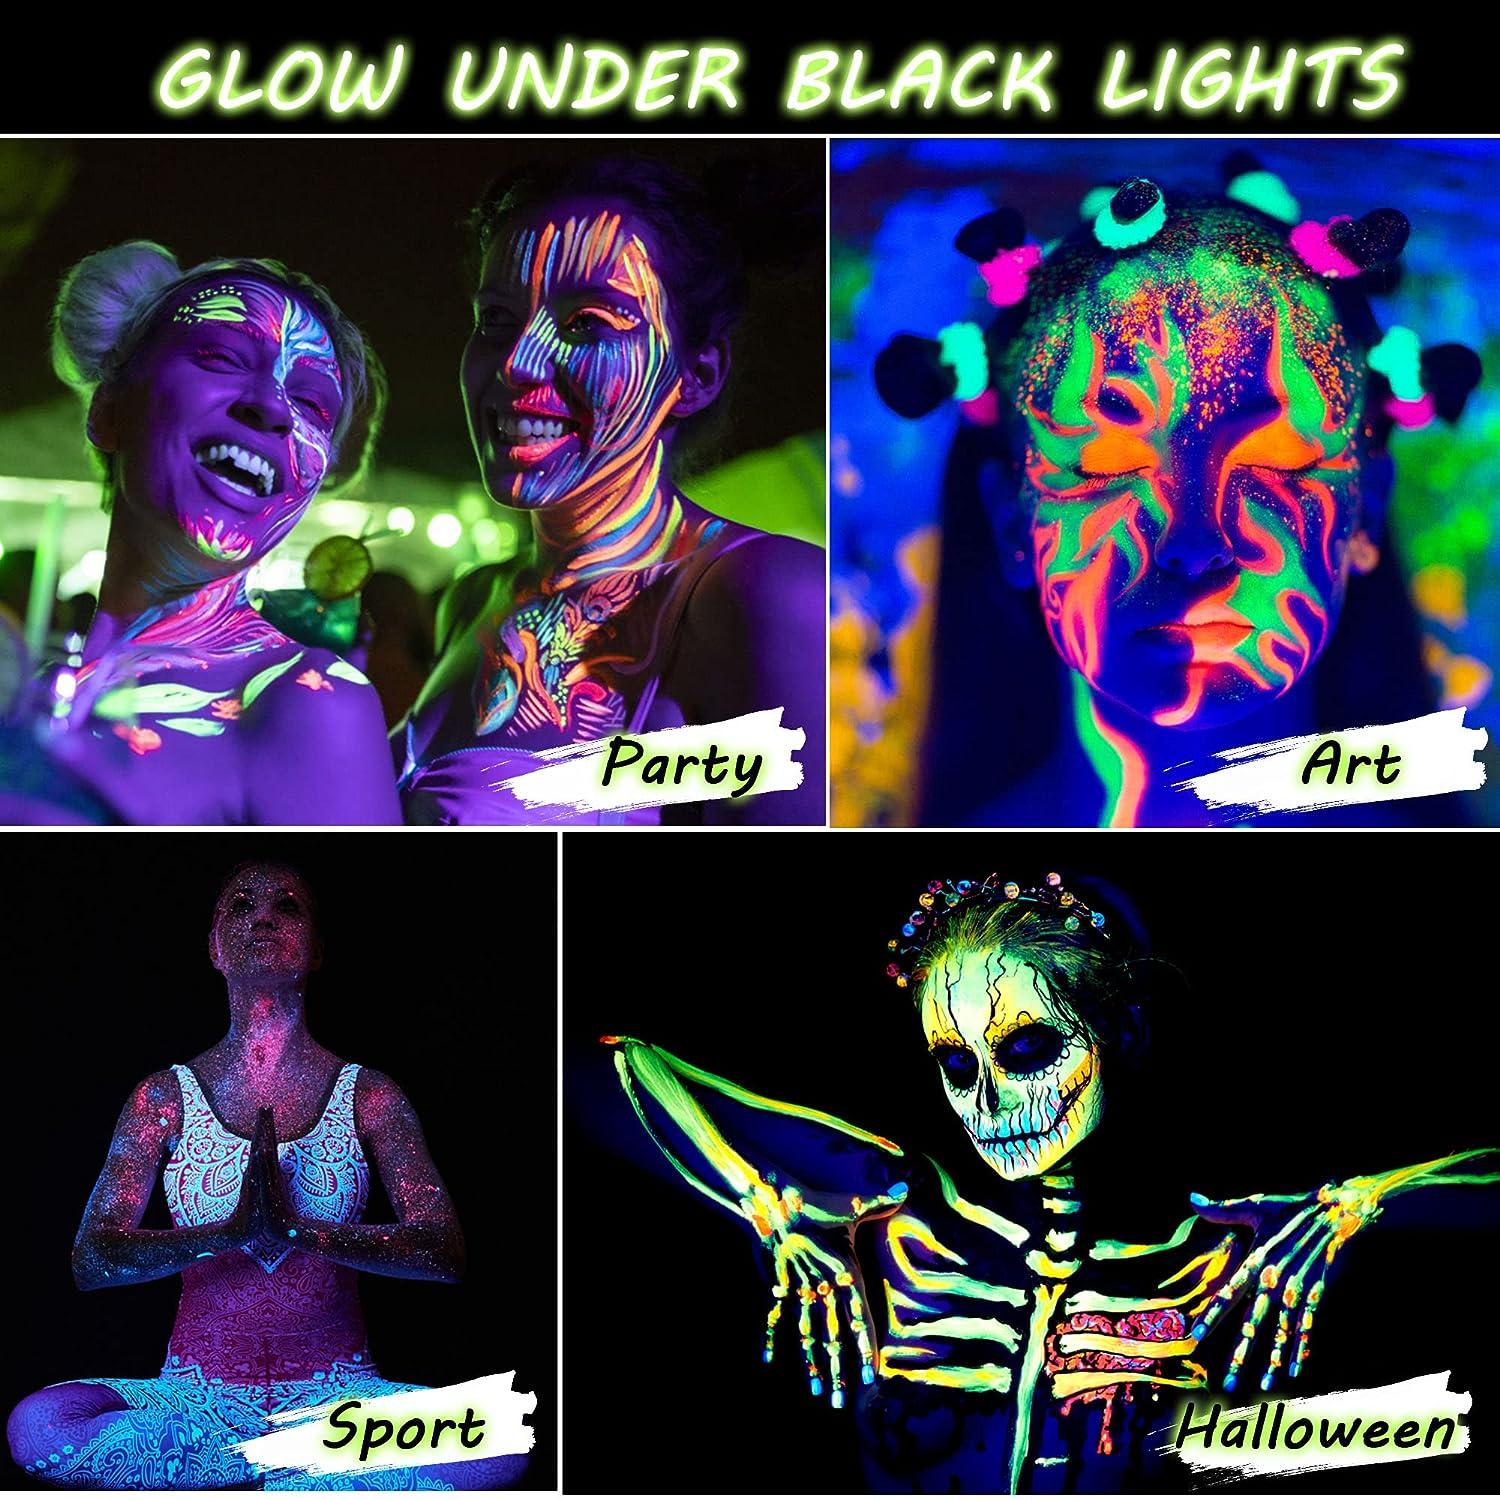 Neon Face Paint Glow In The Dark Body Art Party UV Reactive Blue Halloween  New